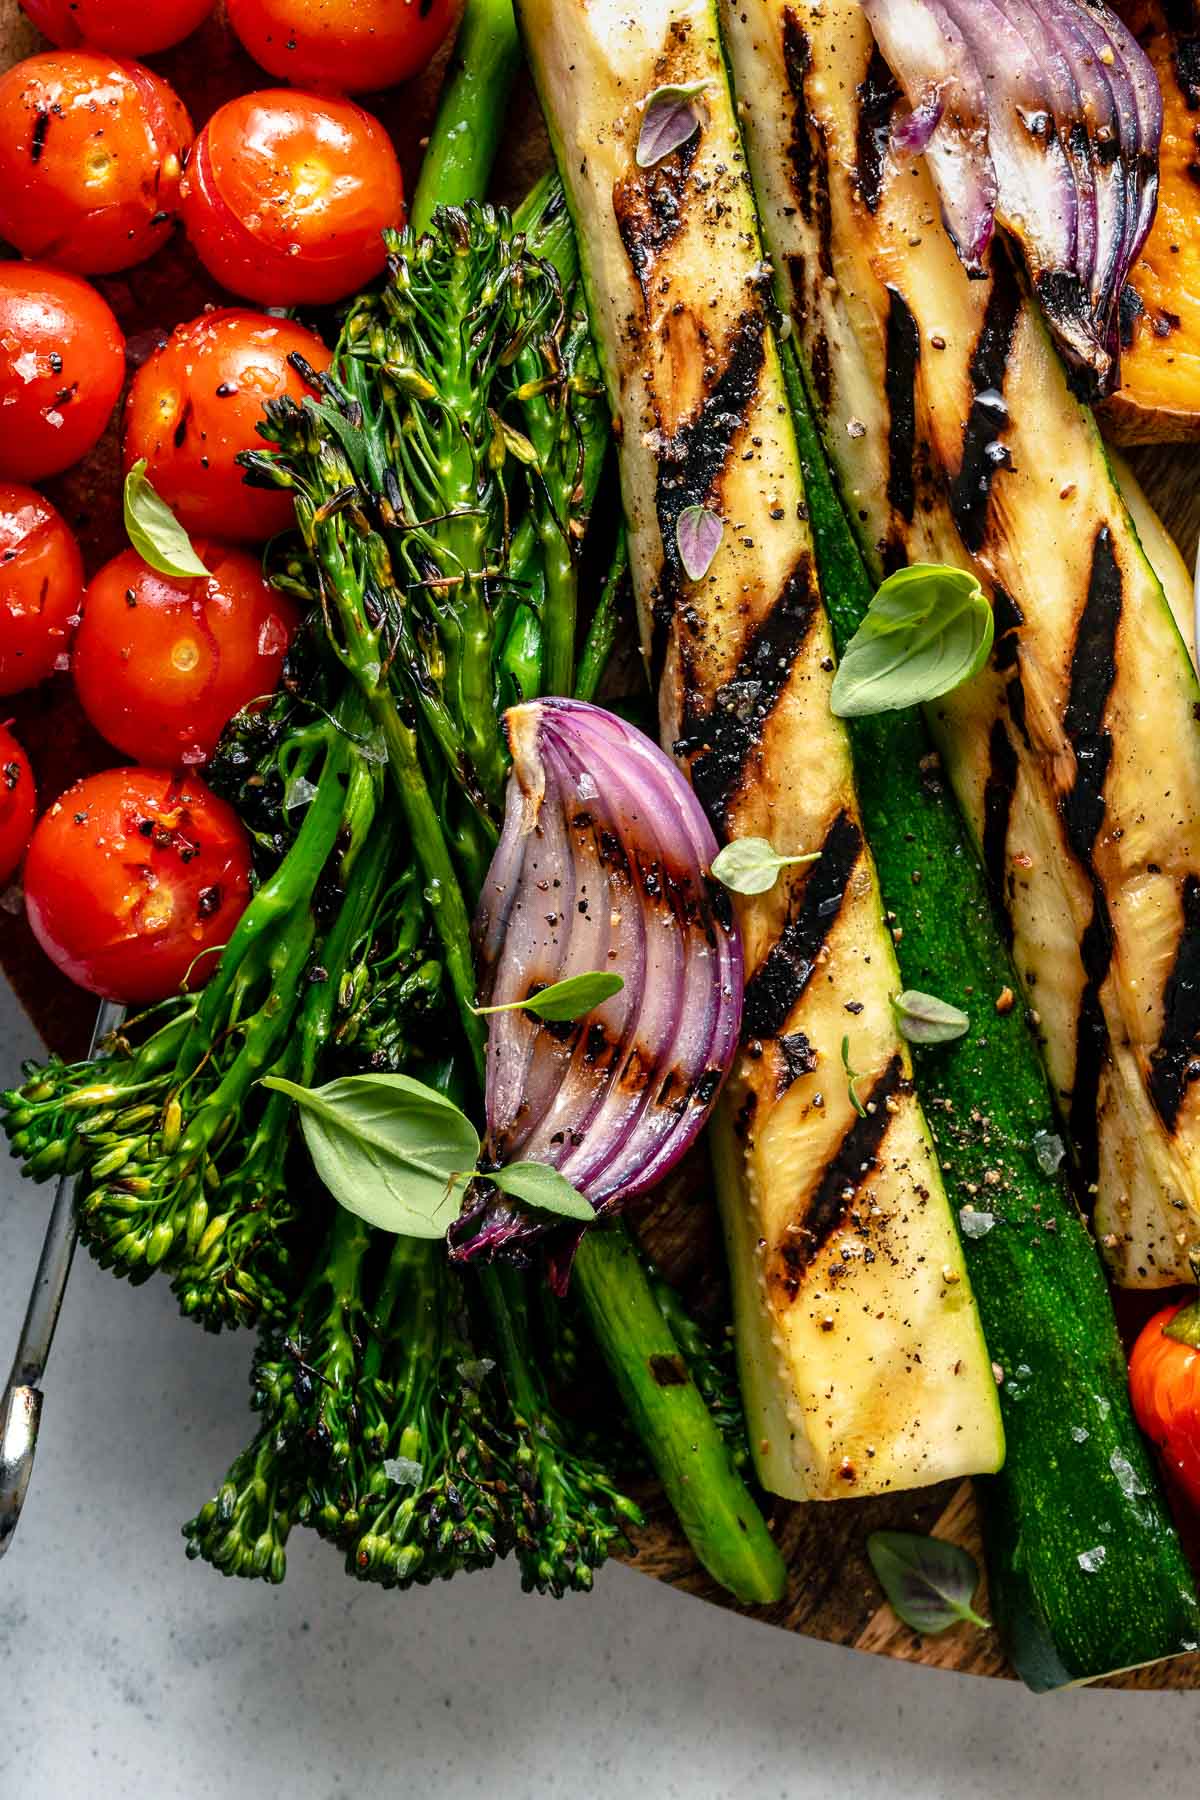 A close up for grilled veggies arranged on top of a round wooden cutting board. The close up includes grilled onion, grilled tomato skewers, grilled zucchini, & grilled broccolini garnished with fresh herbs. The wooden cutting board sits on top of a blue & white marbled surface.